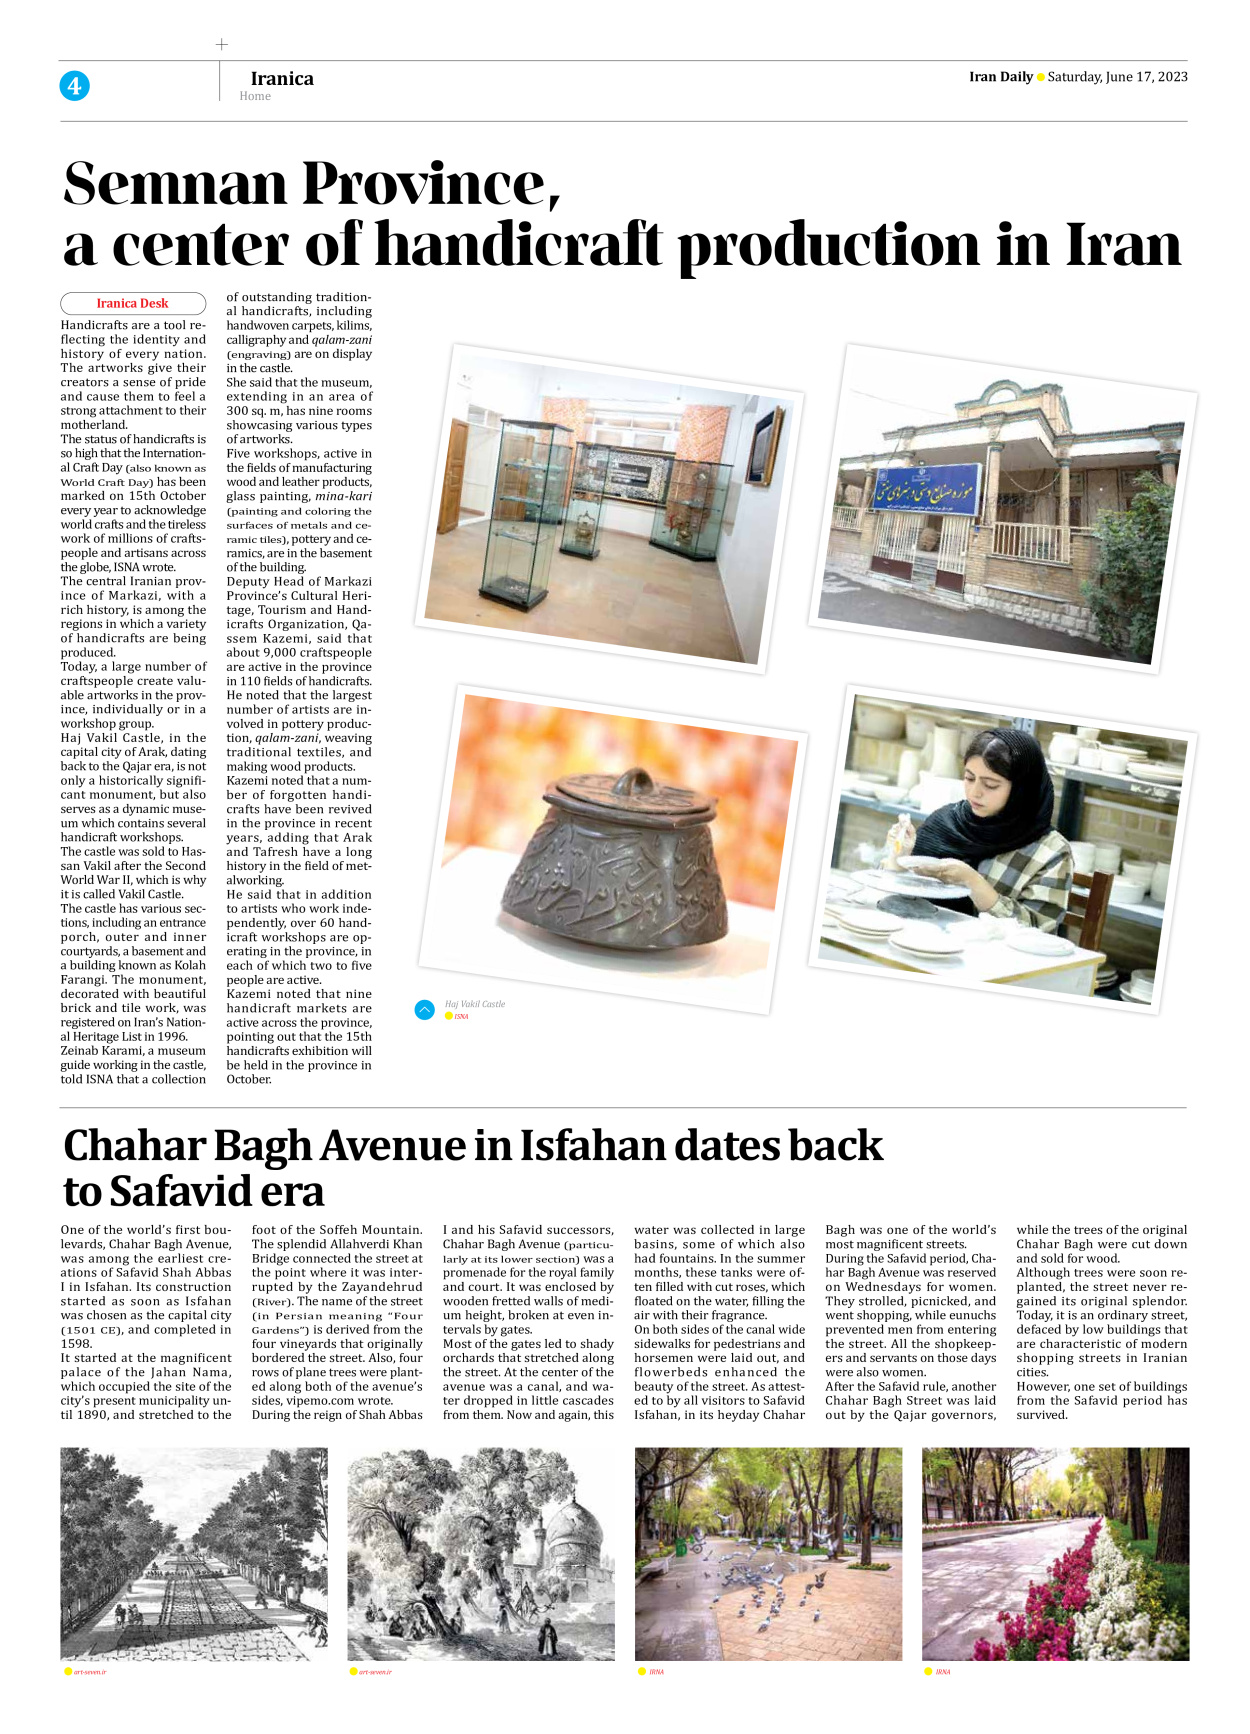 Iran Daily - Number Seven Thousand Three Hundred and Sixteen - 17 June 2023 - Page 4